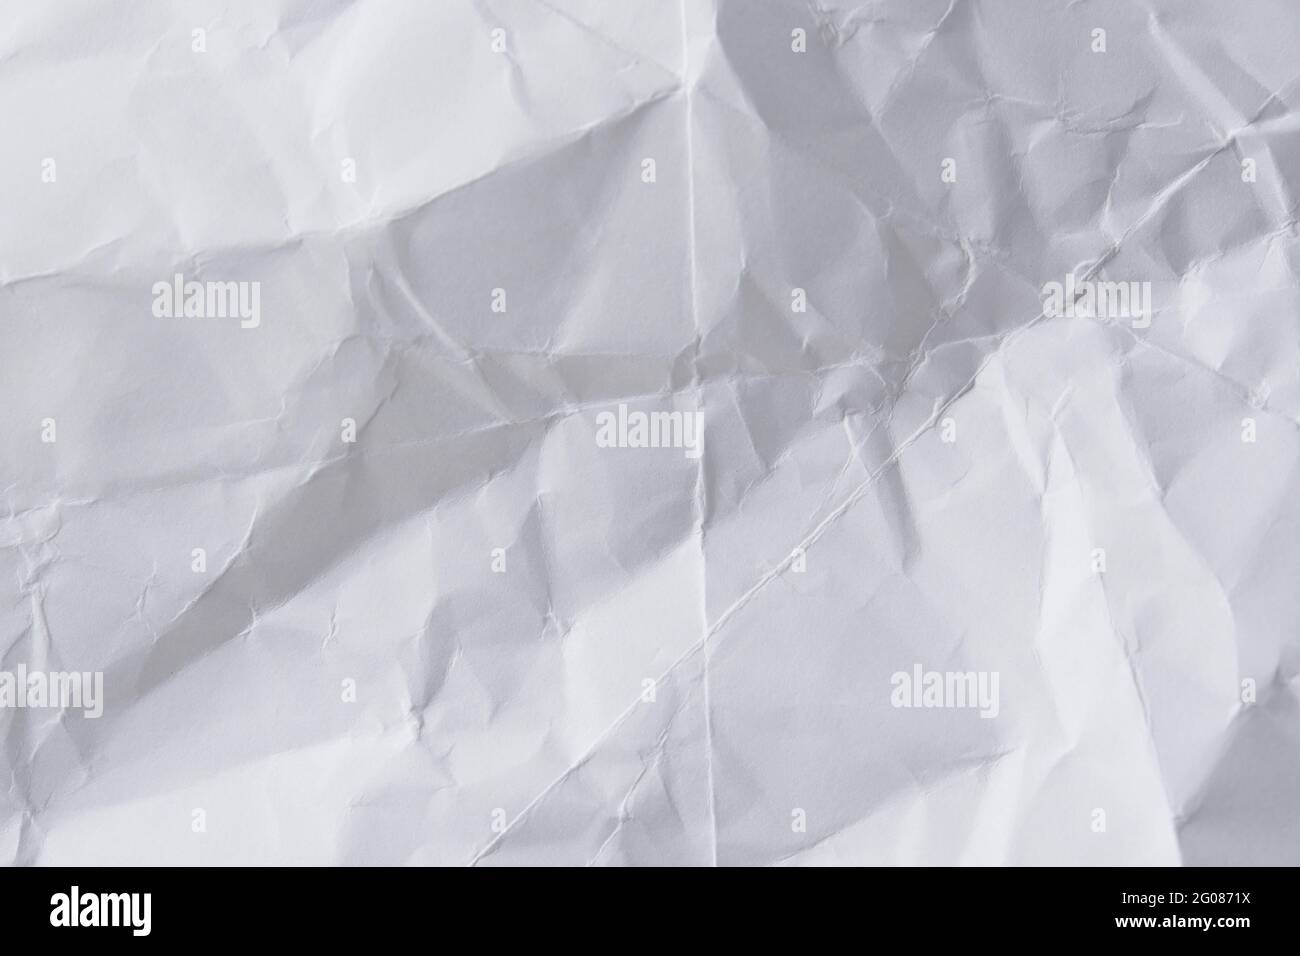 White crumpled wrapping paper background, texture of grey wrinkled of old  vintage paper, creases on the surface of gray paper - Stock Image -  Everypixel